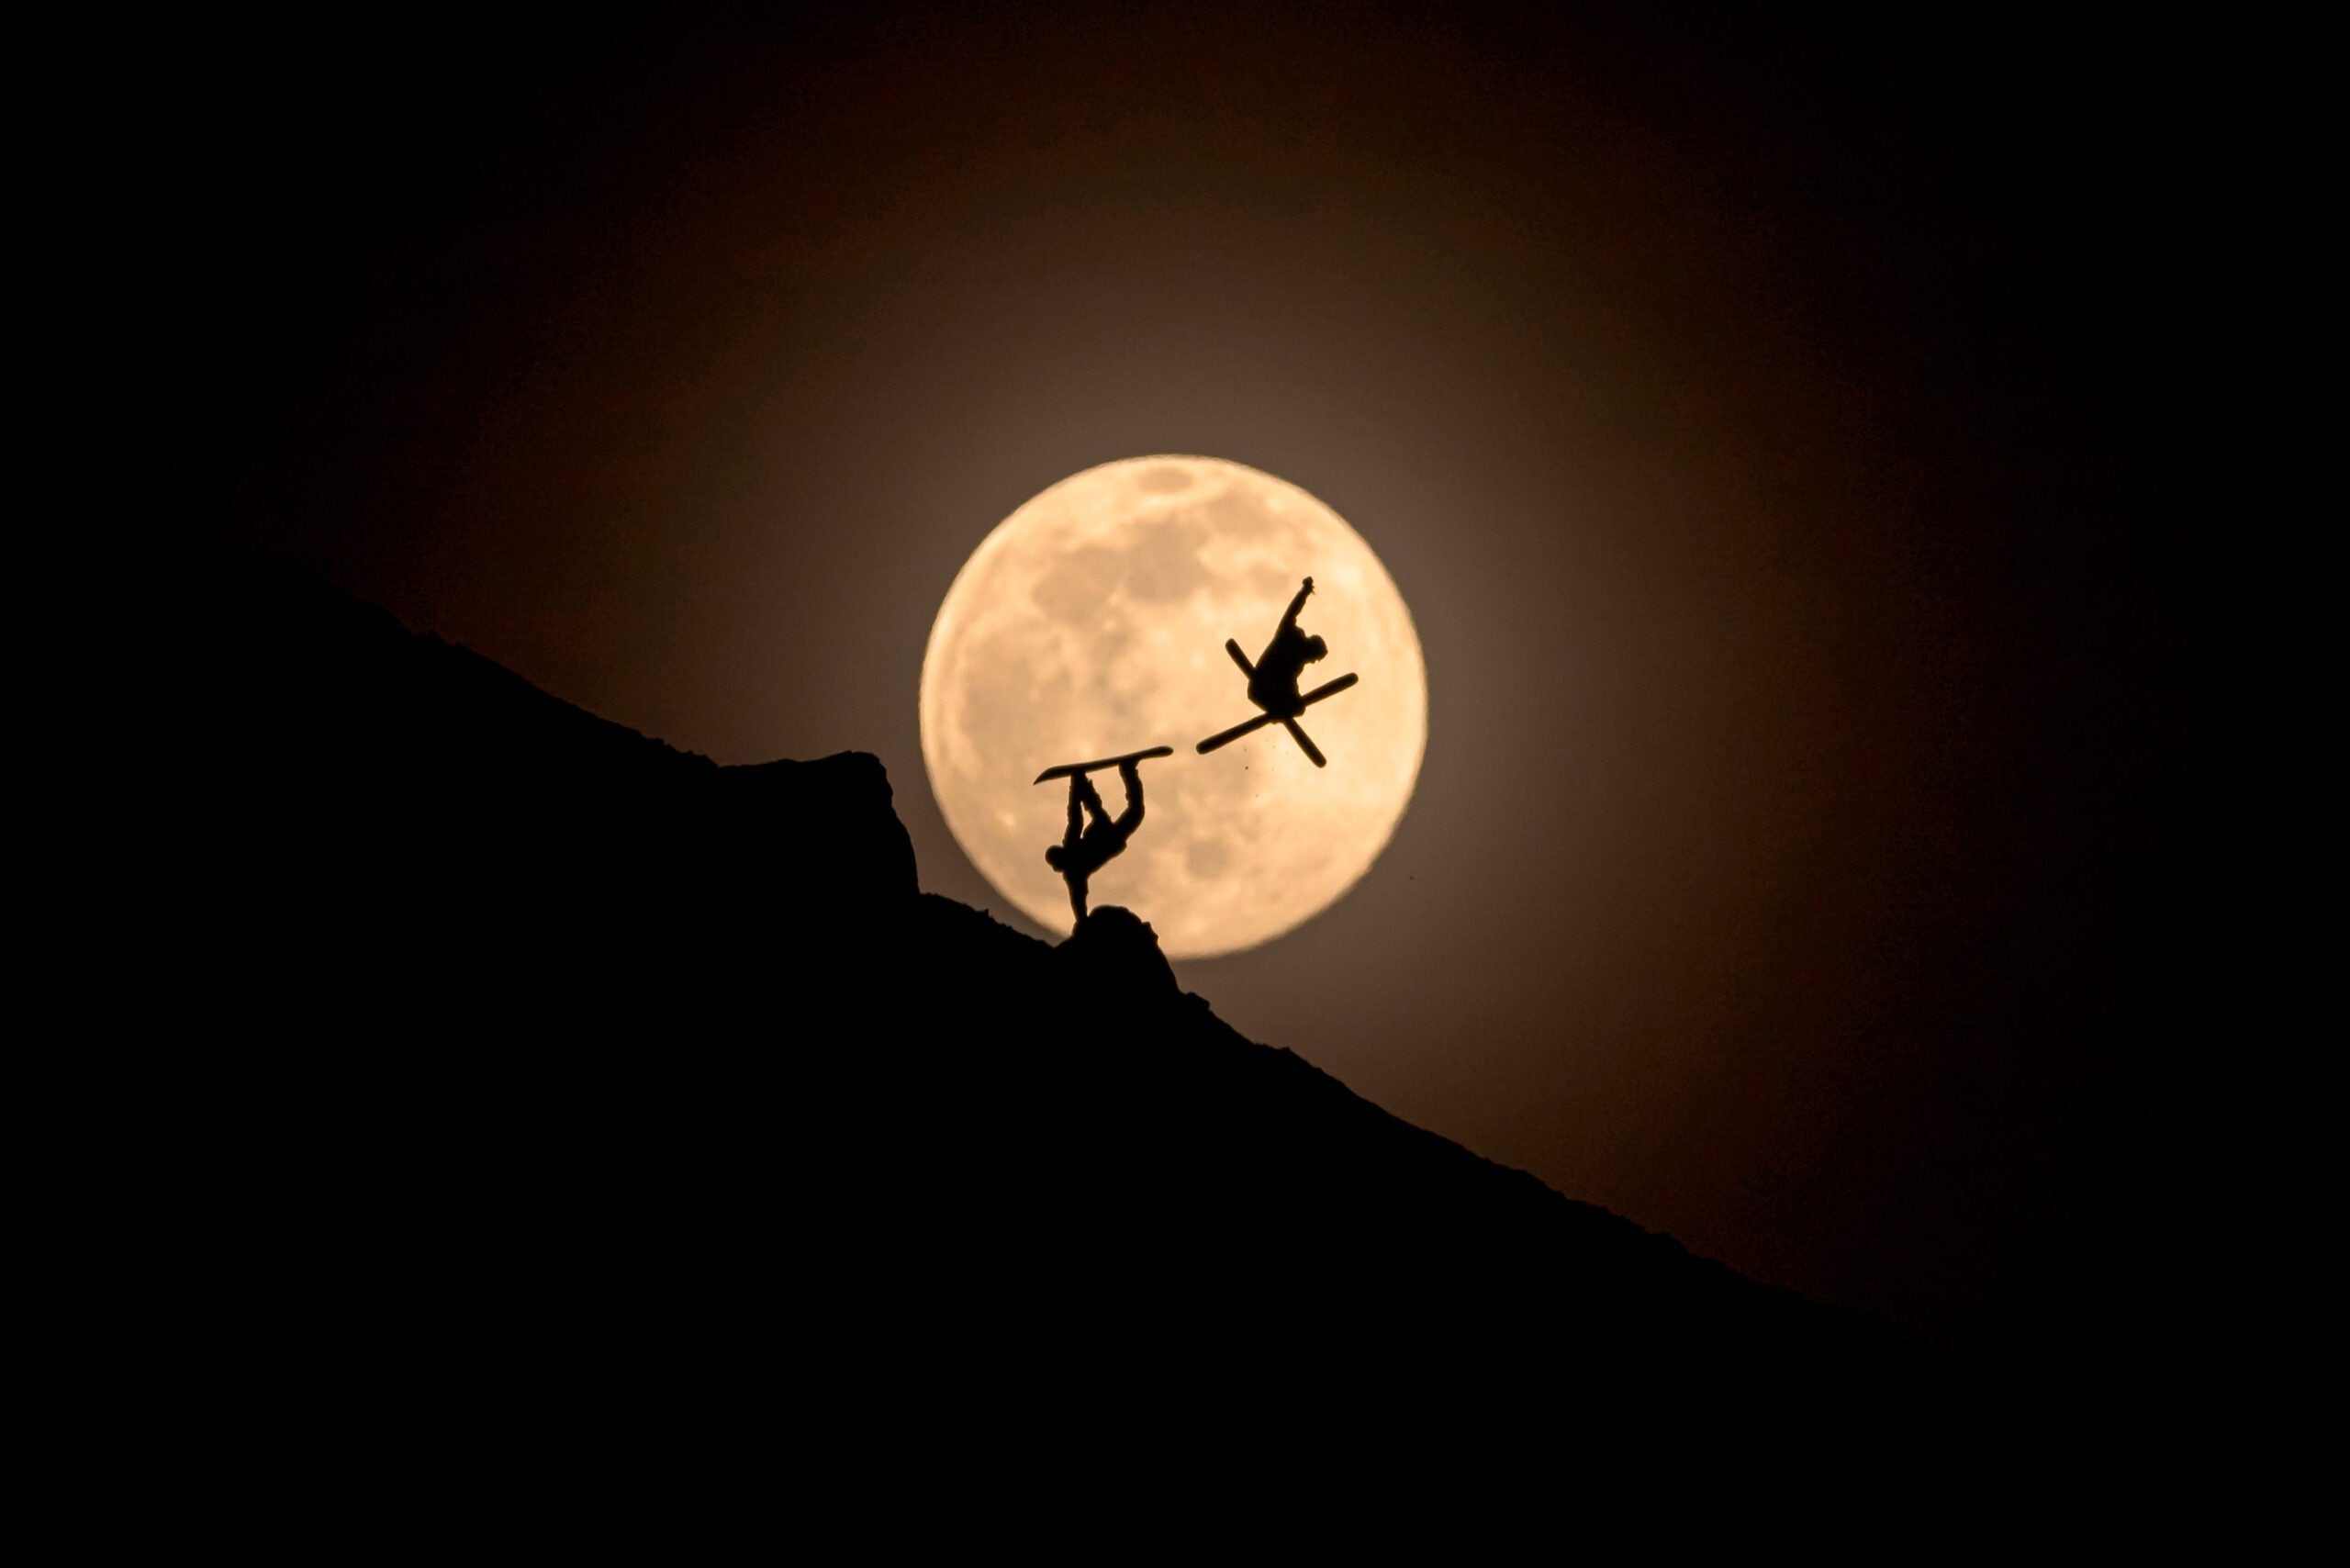 Yhabril (Spain) won the Best of Instagram (photography) category for his photo of a skier and a snowboarder silhouetted against the moon.